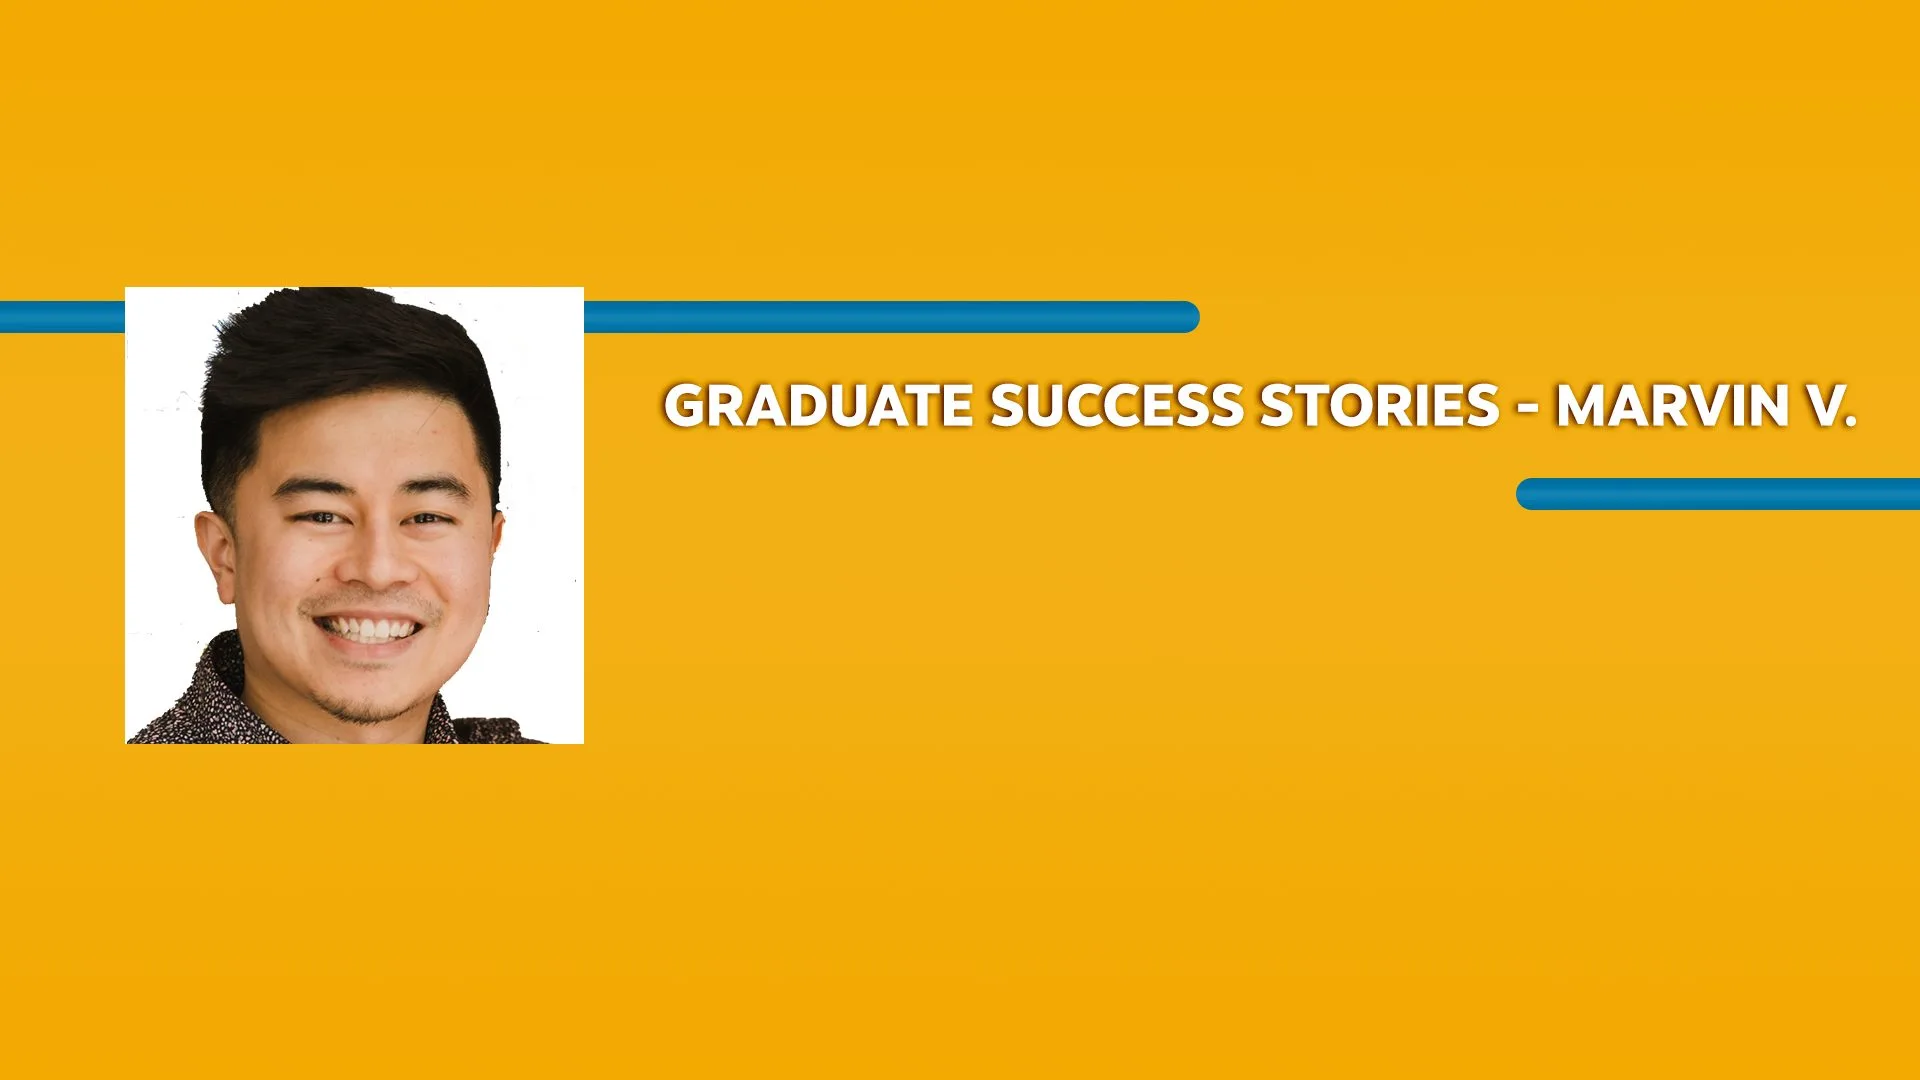 Orange rectangle with a picture of a man wearing a shirt and Graduate Success Stories - Marvin V. text in white font